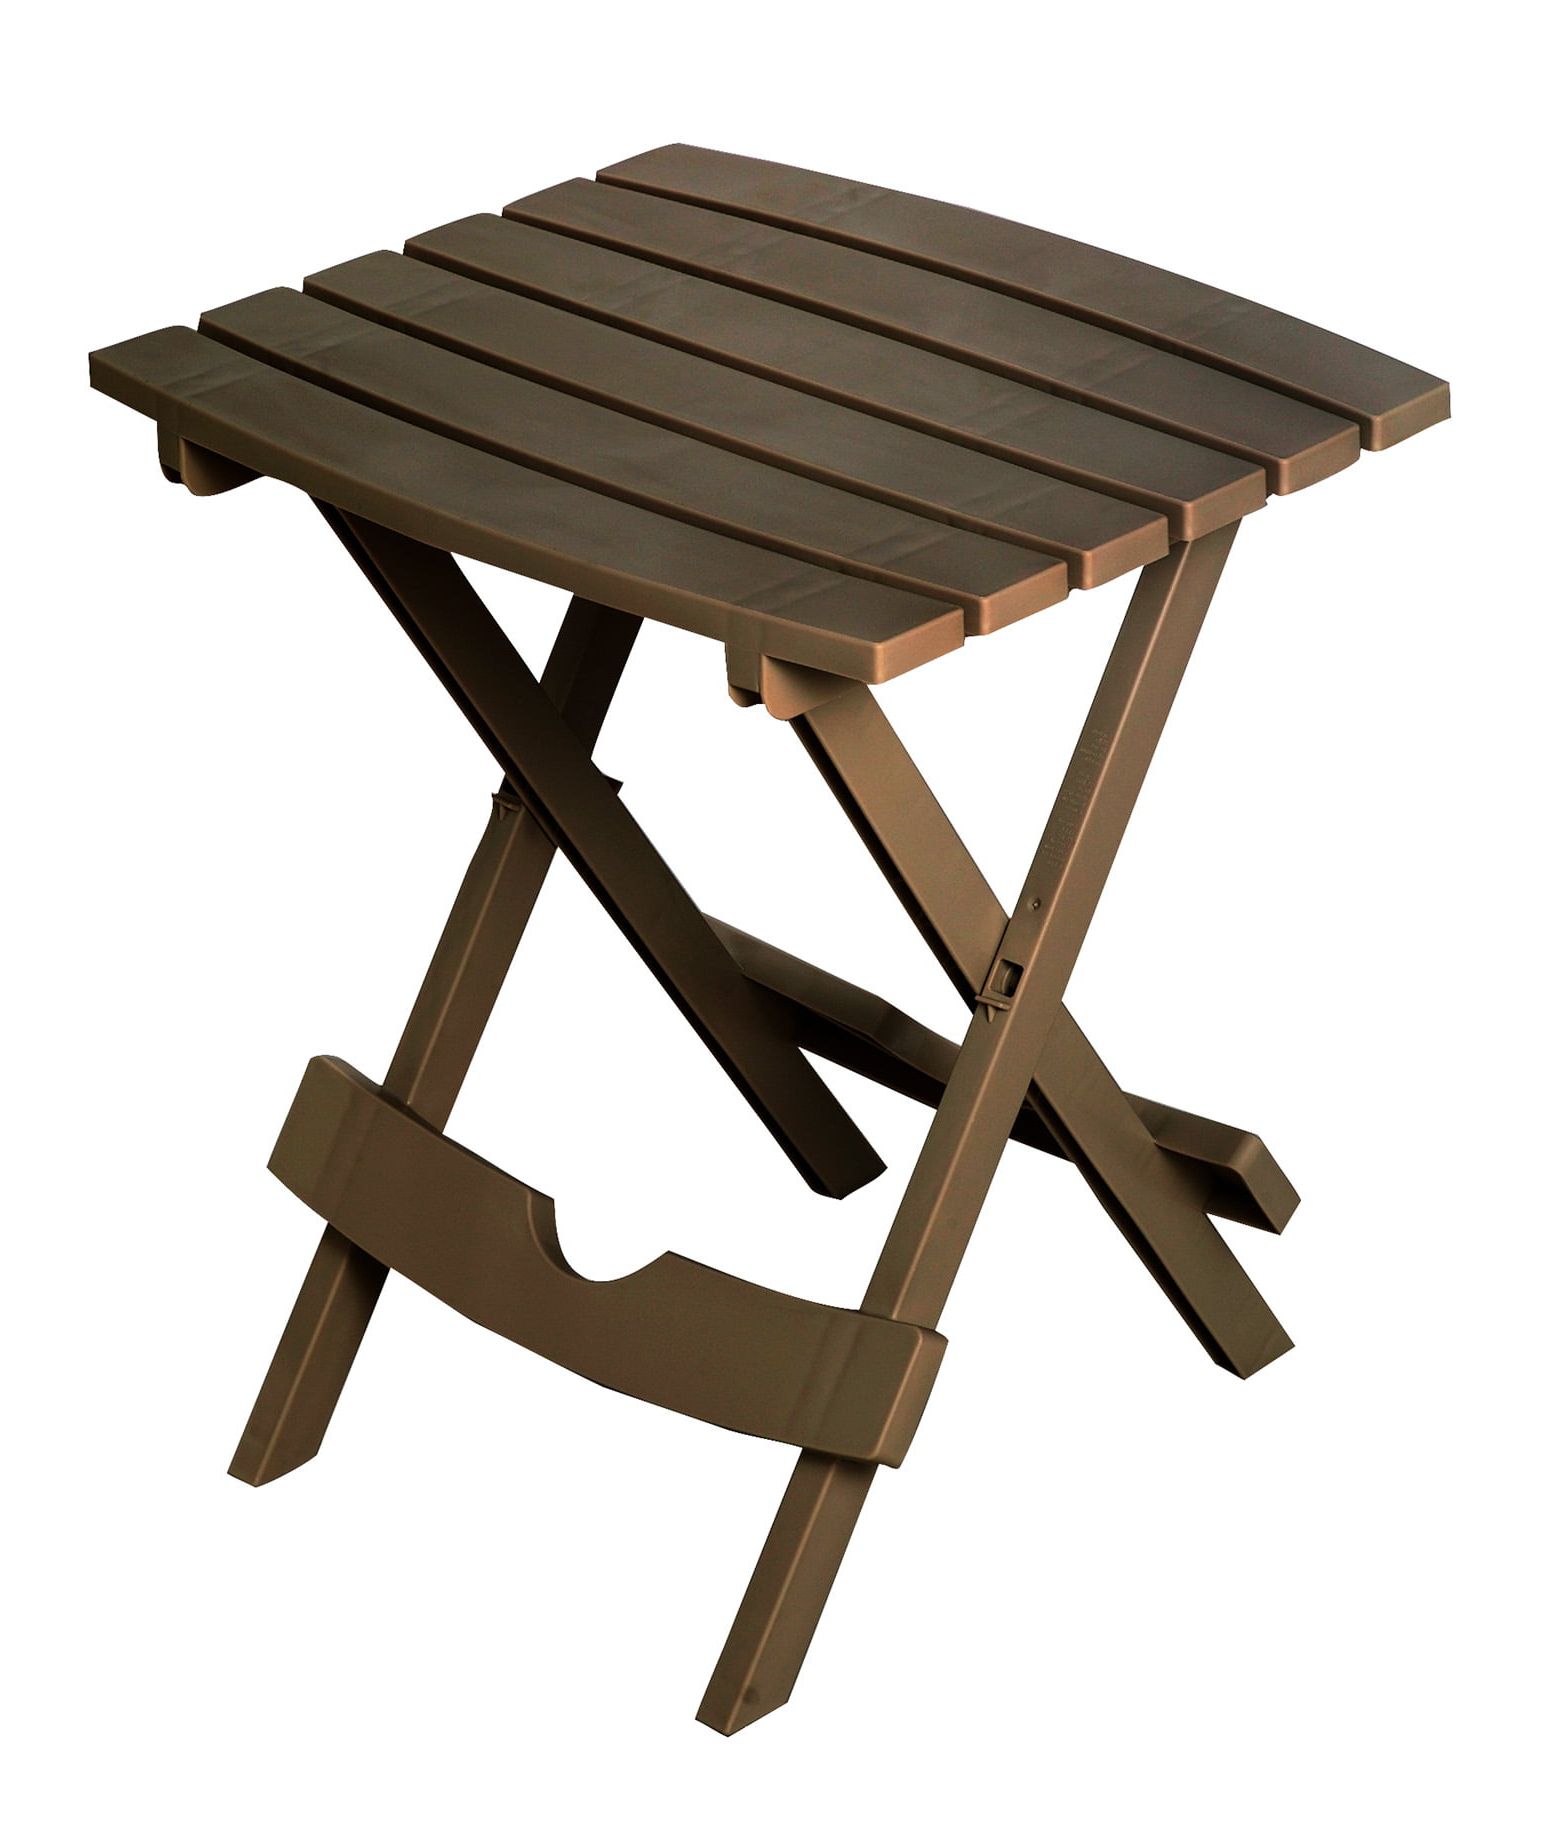 Preferred Folding Accent Outdoor Tables In Adams Quik Fold Resin Side Table – Brown – Walmart (View 4 of 15)